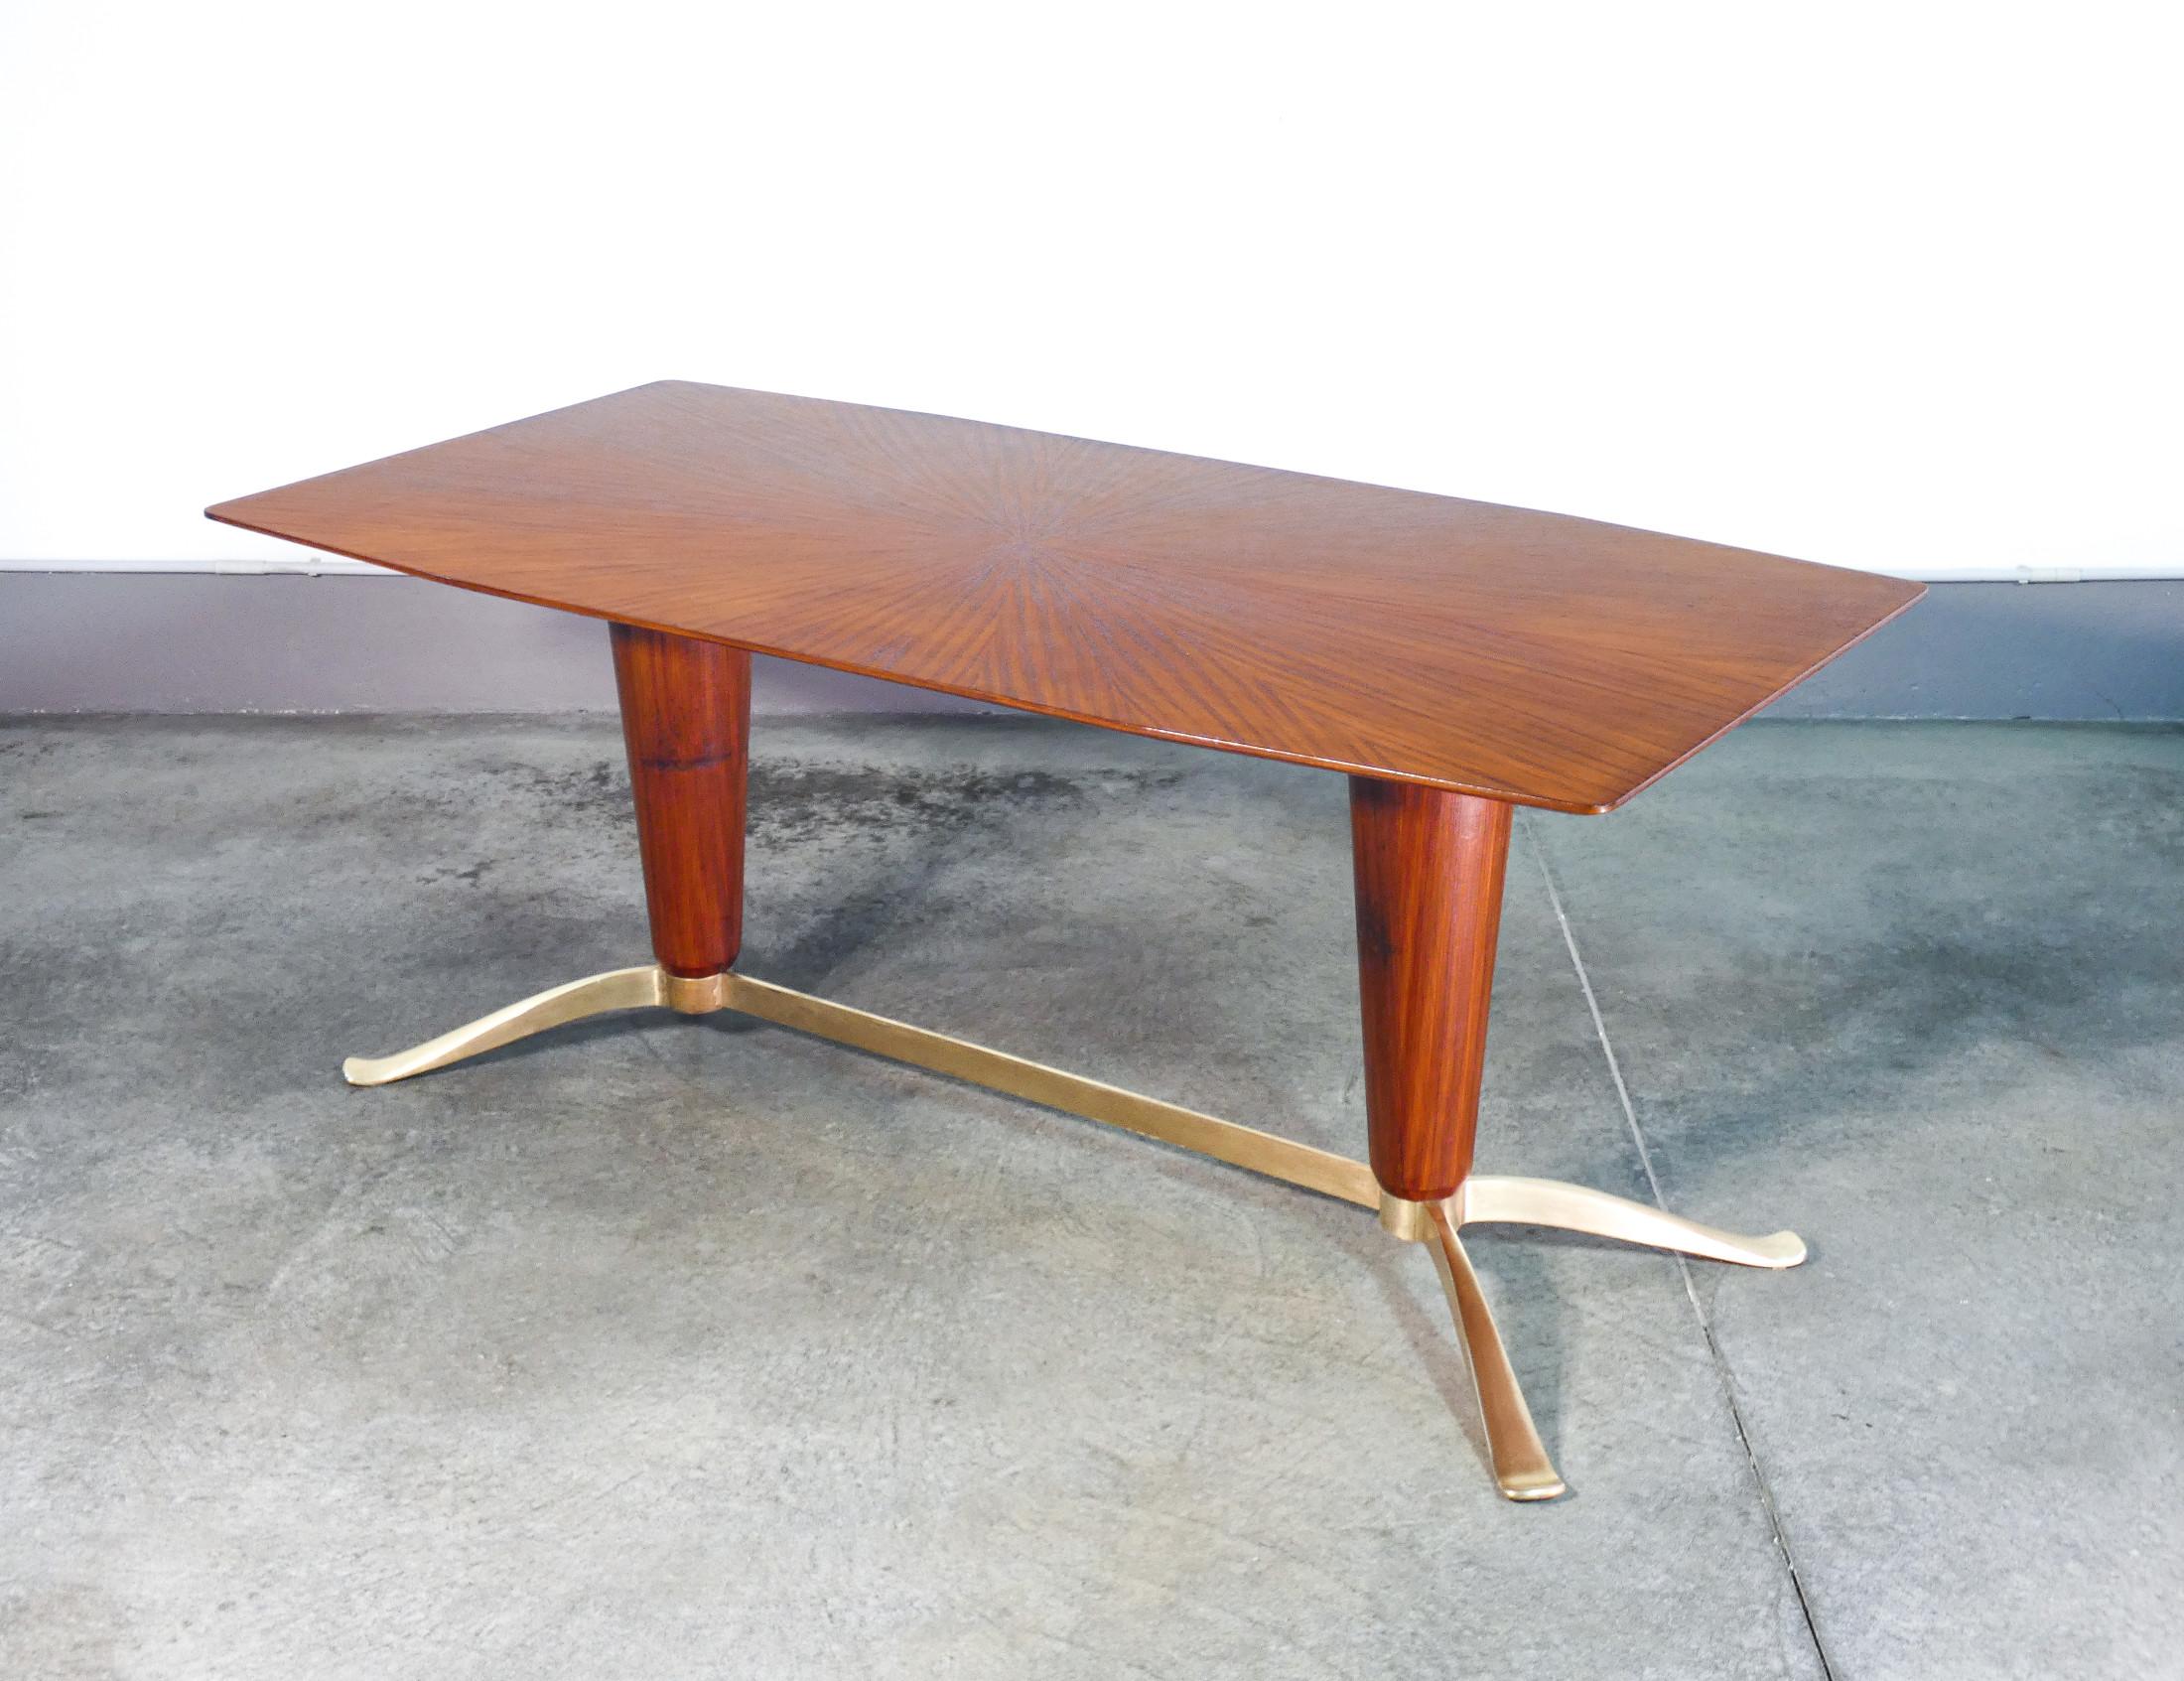 Designer Table
italian 1940s
attributed to the hand
by Paul BUFFA.

ORIGIN
Italy

PERIOD
1940s

DESIGNER
Attributed to Paul BUFFA

MATERIALS
Wood and brass

DIMENSIONS
Height:- 76cm
Width: 180cm
Depth: 90 cm

CONDITIONS
The table is in excellent